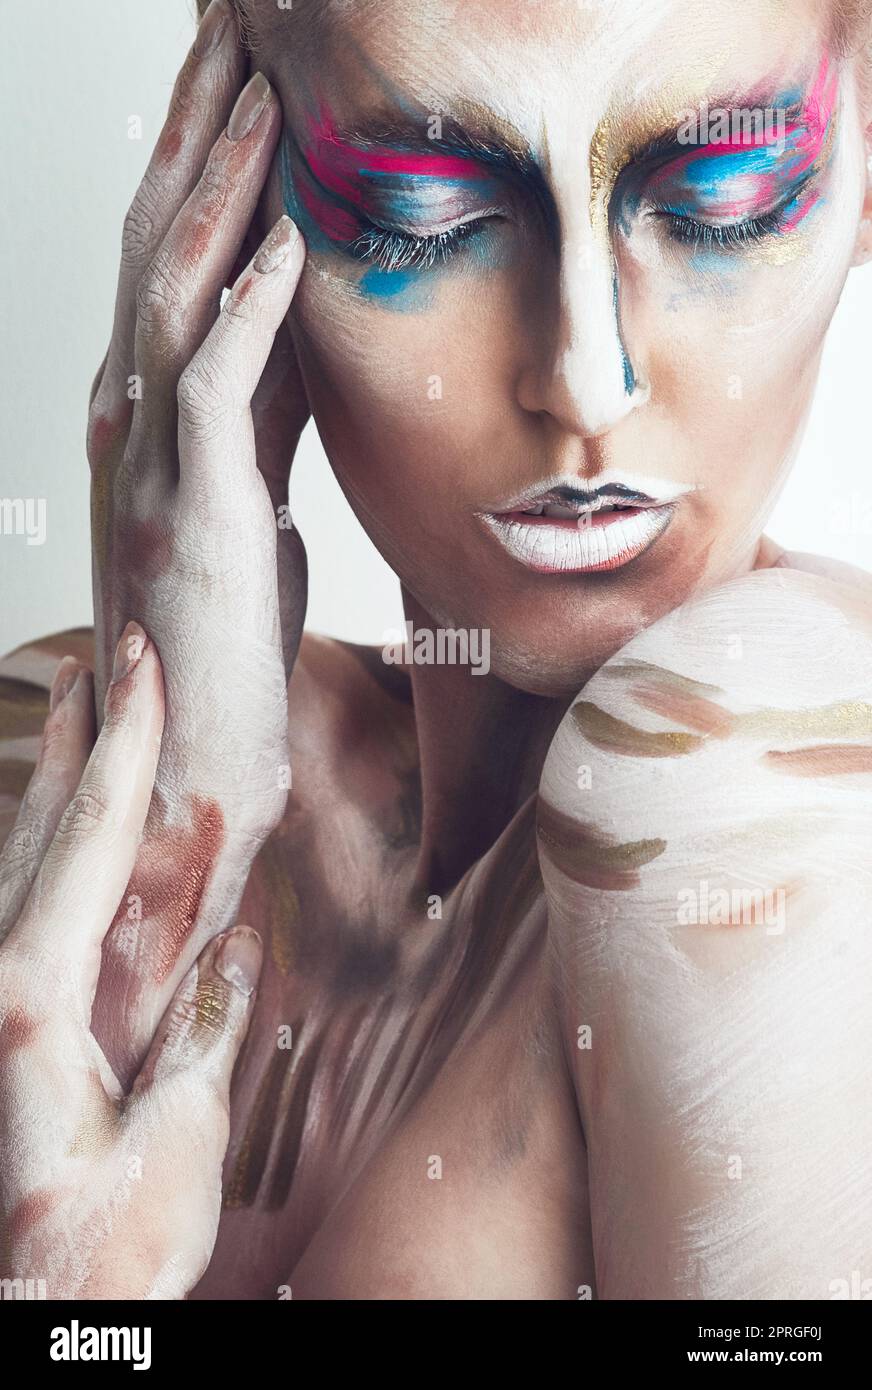 Dreaming in colour. Studio shot of a young woman posing with paint on her face. Stock Photo